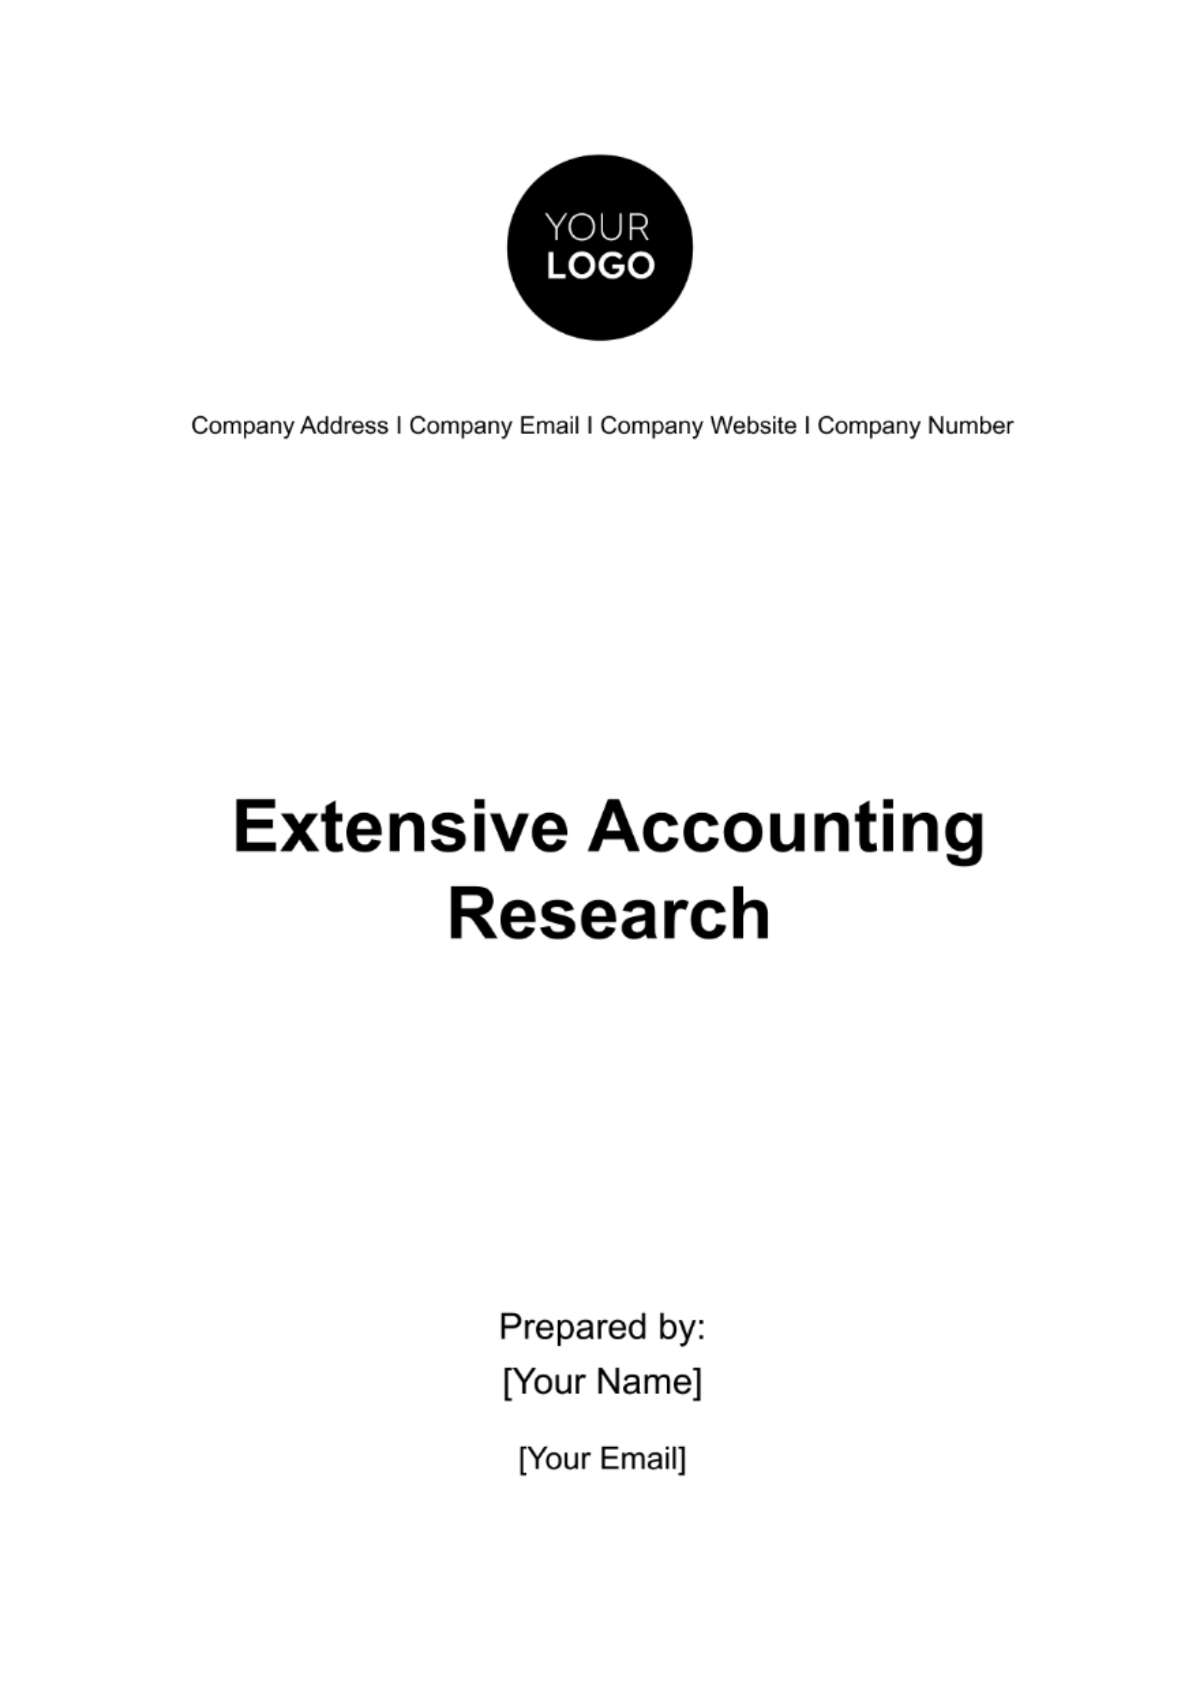 Extensive Accounting Research Template